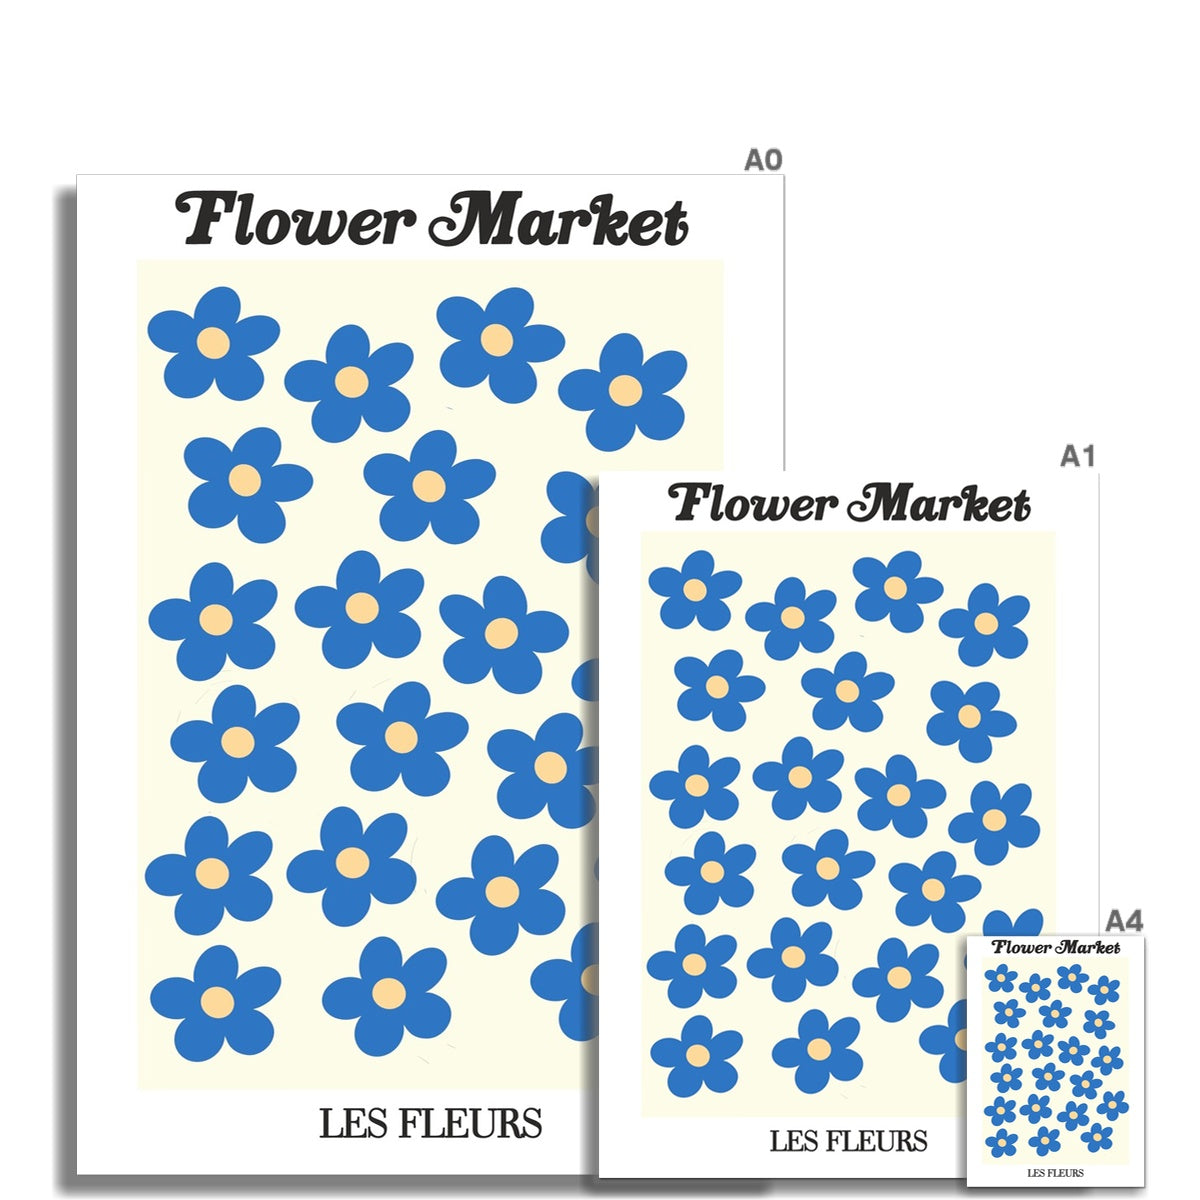 © les muses / Our Flower Market / Les Fleurs collection features wall art with a vibrant daisy design under original hand drawn typography. Danish pastel posters full of daisies to brighten up any gallery wall.